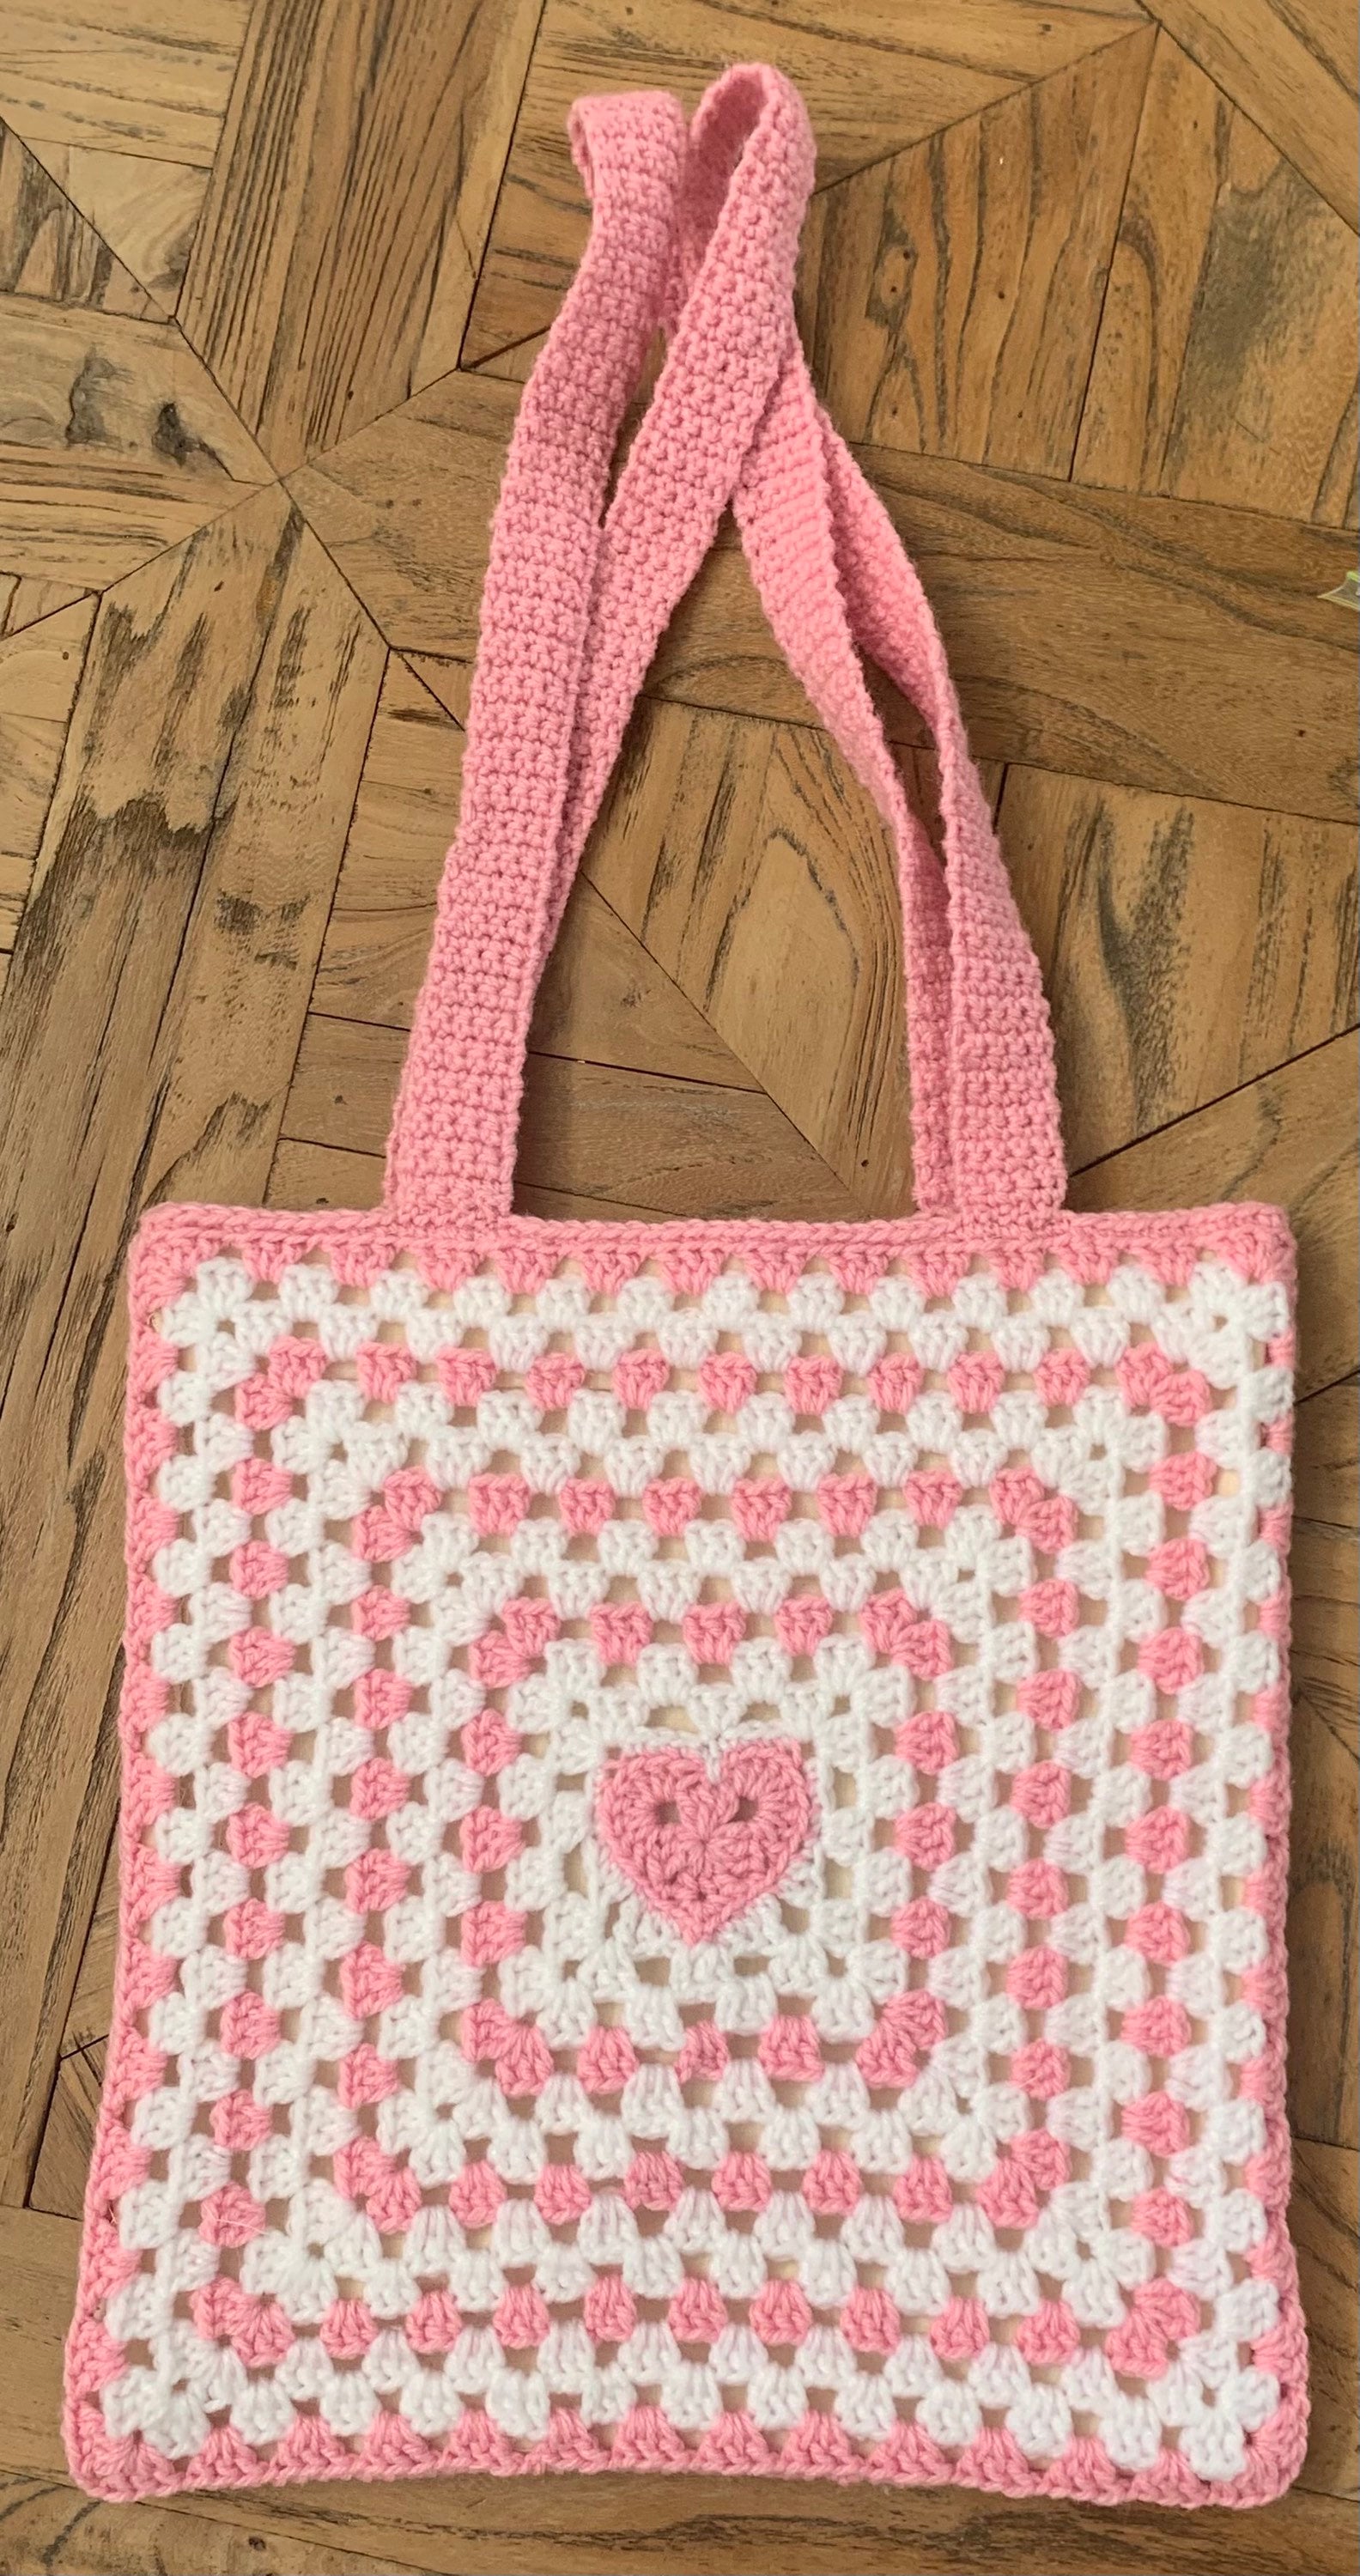 Create a Stylish Crochet Heart Tote Bag from Granny Squares – Tutorials &  More